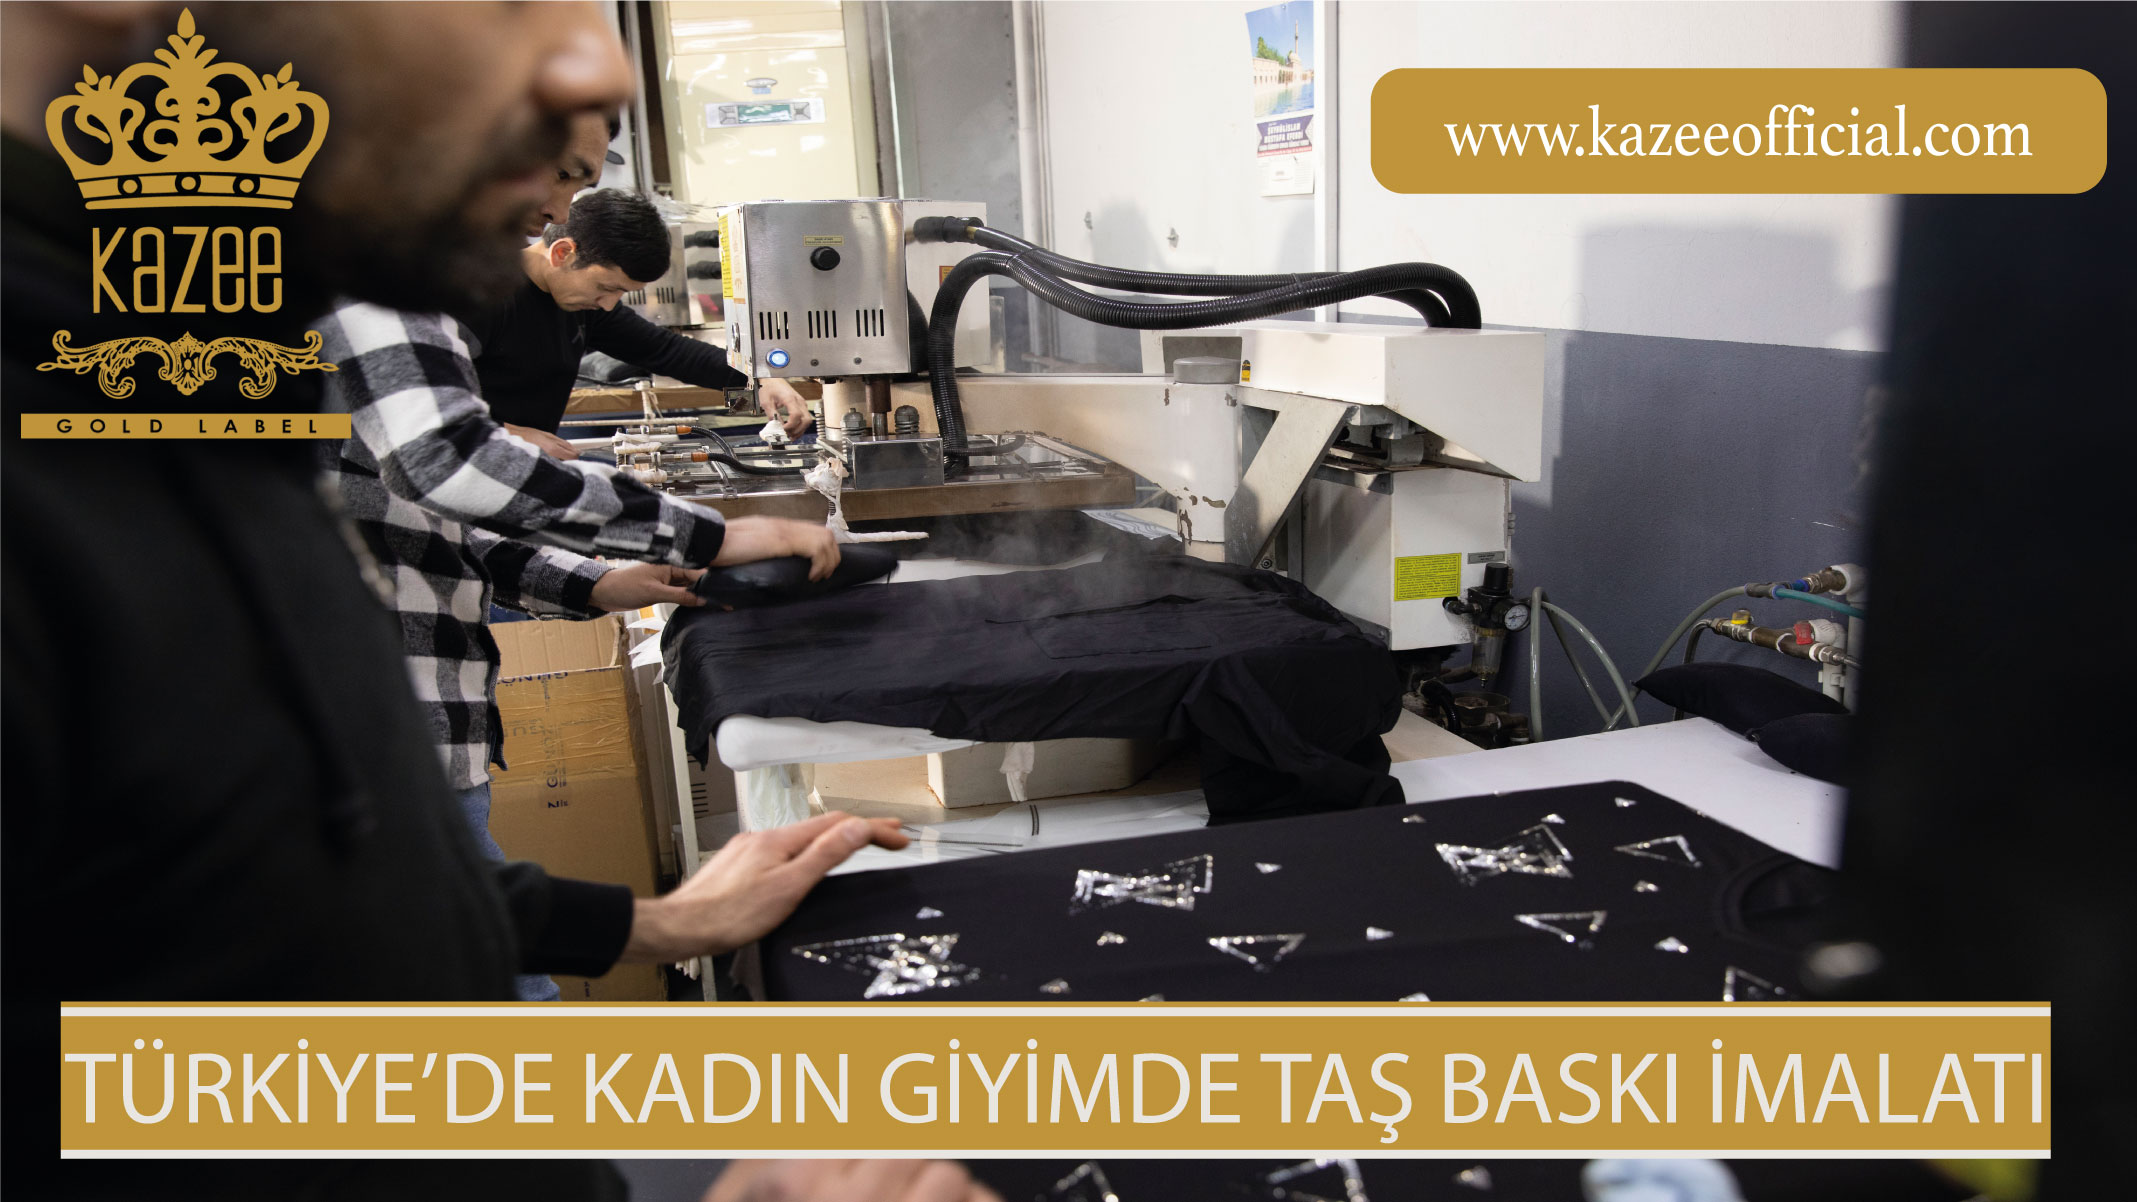 STONE PRINTING MANUFACTURING IN WOMEN'S CLOTHING IN TURKEY